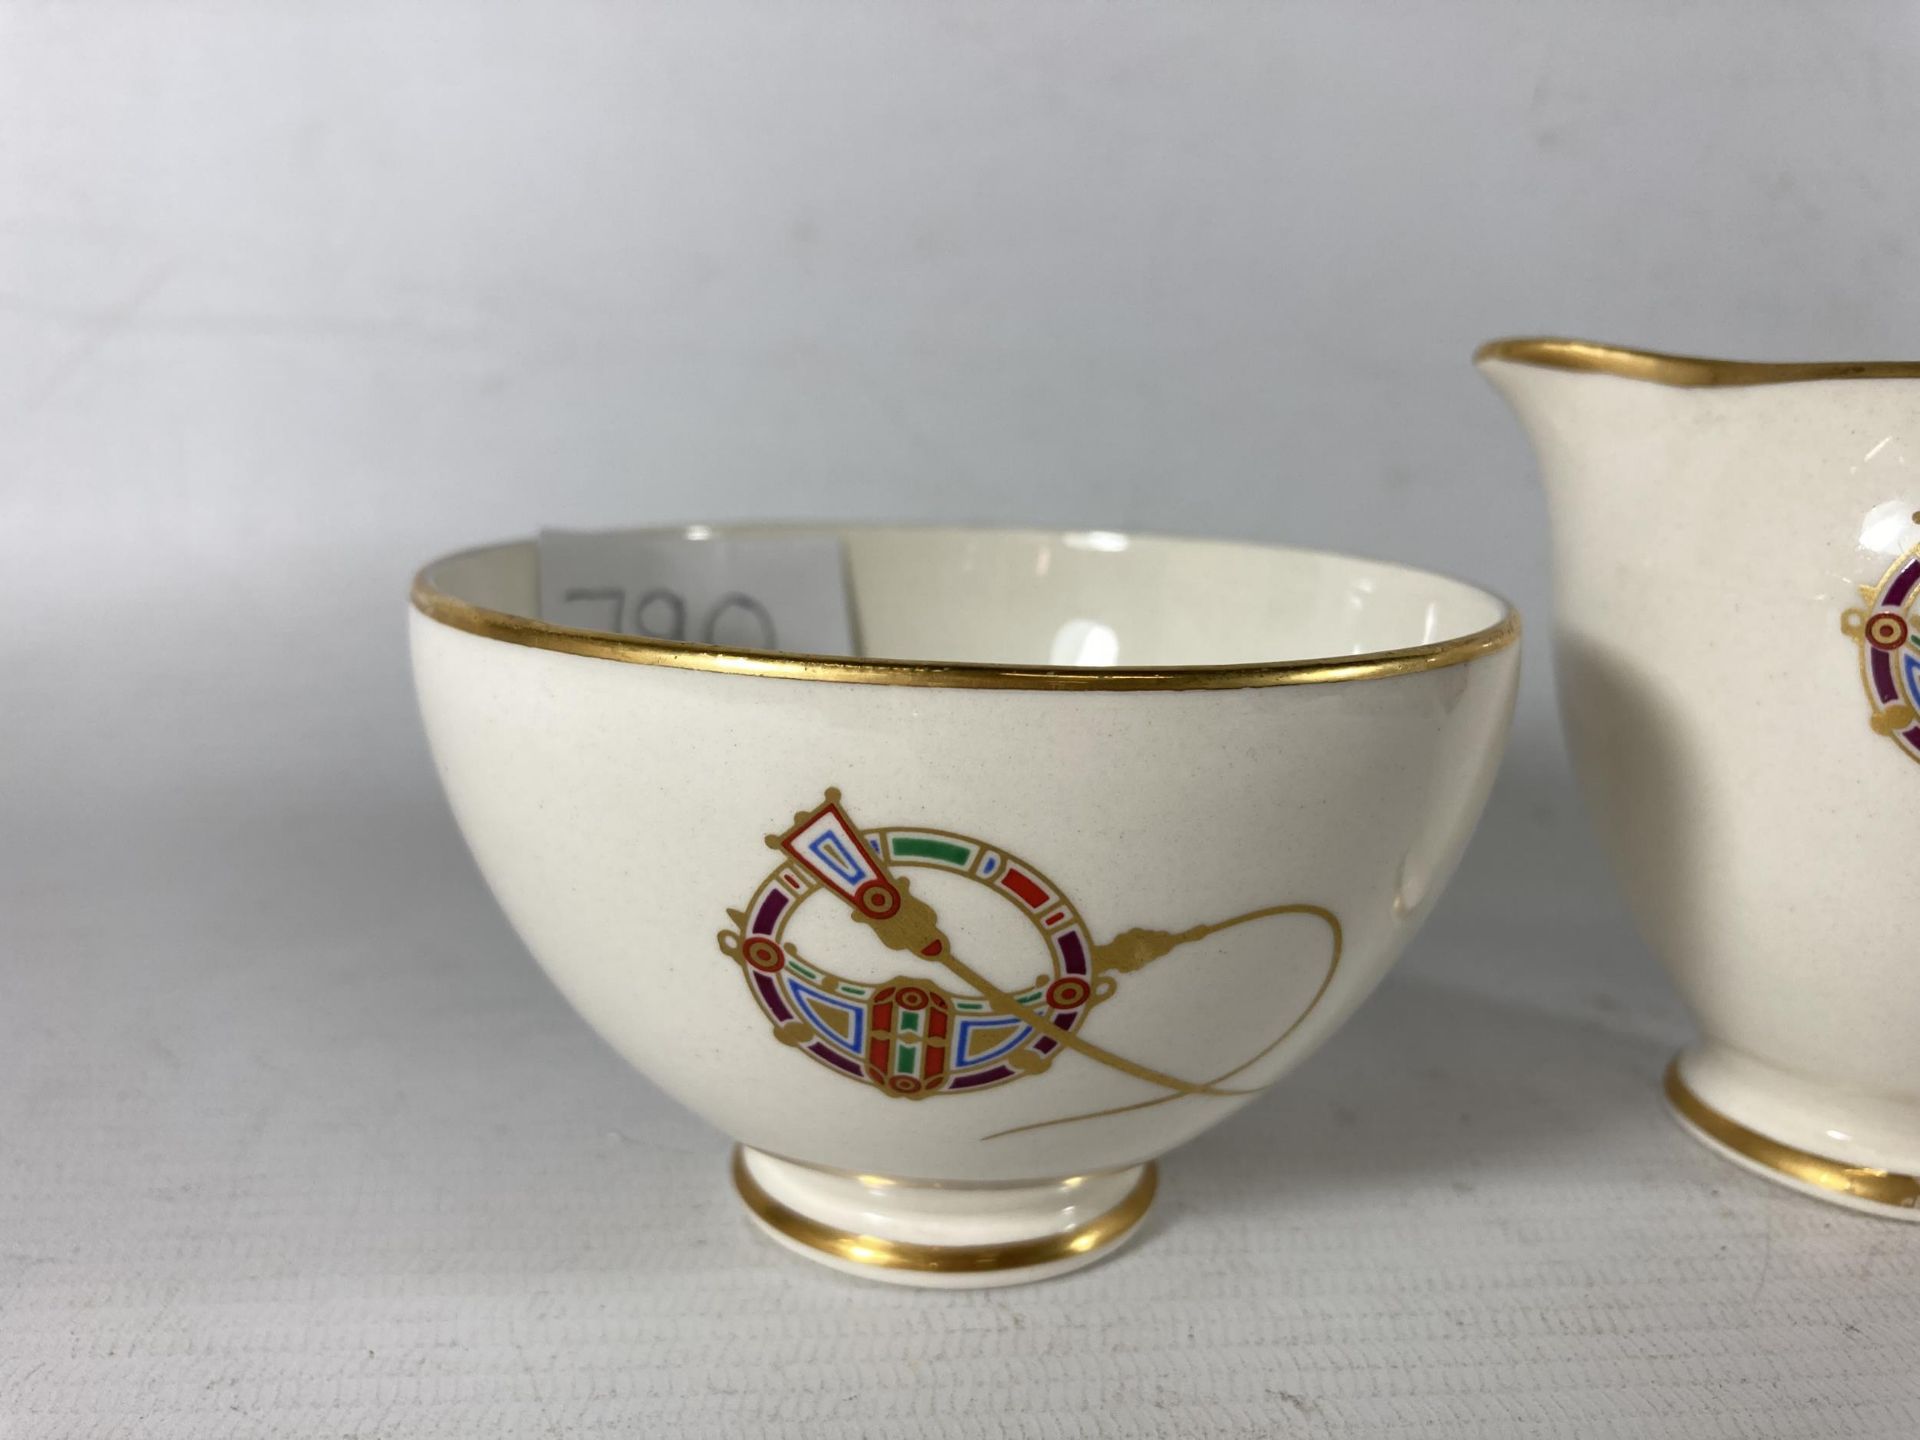 TWO PIECES OF IRISH ARKLOW POTTERY 'TARA BROOCH' TO INCLUDE A CREAM JUG AND SUGAR BOWL - Image 3 of 4